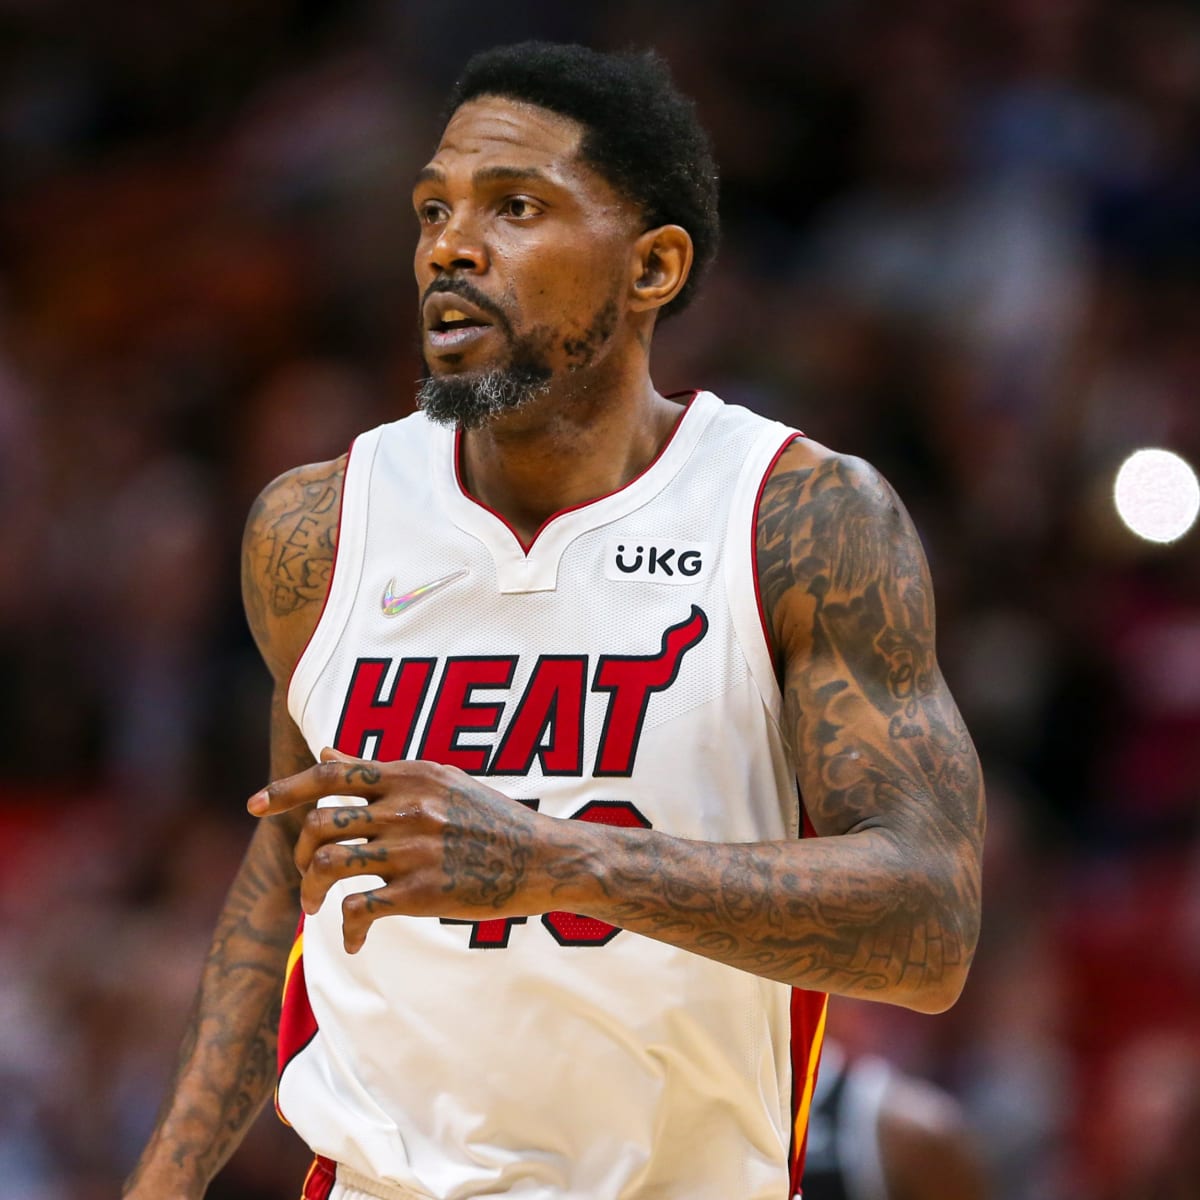 Marlins Turn Up The Heat With Udonis Haslem on “UD” Day